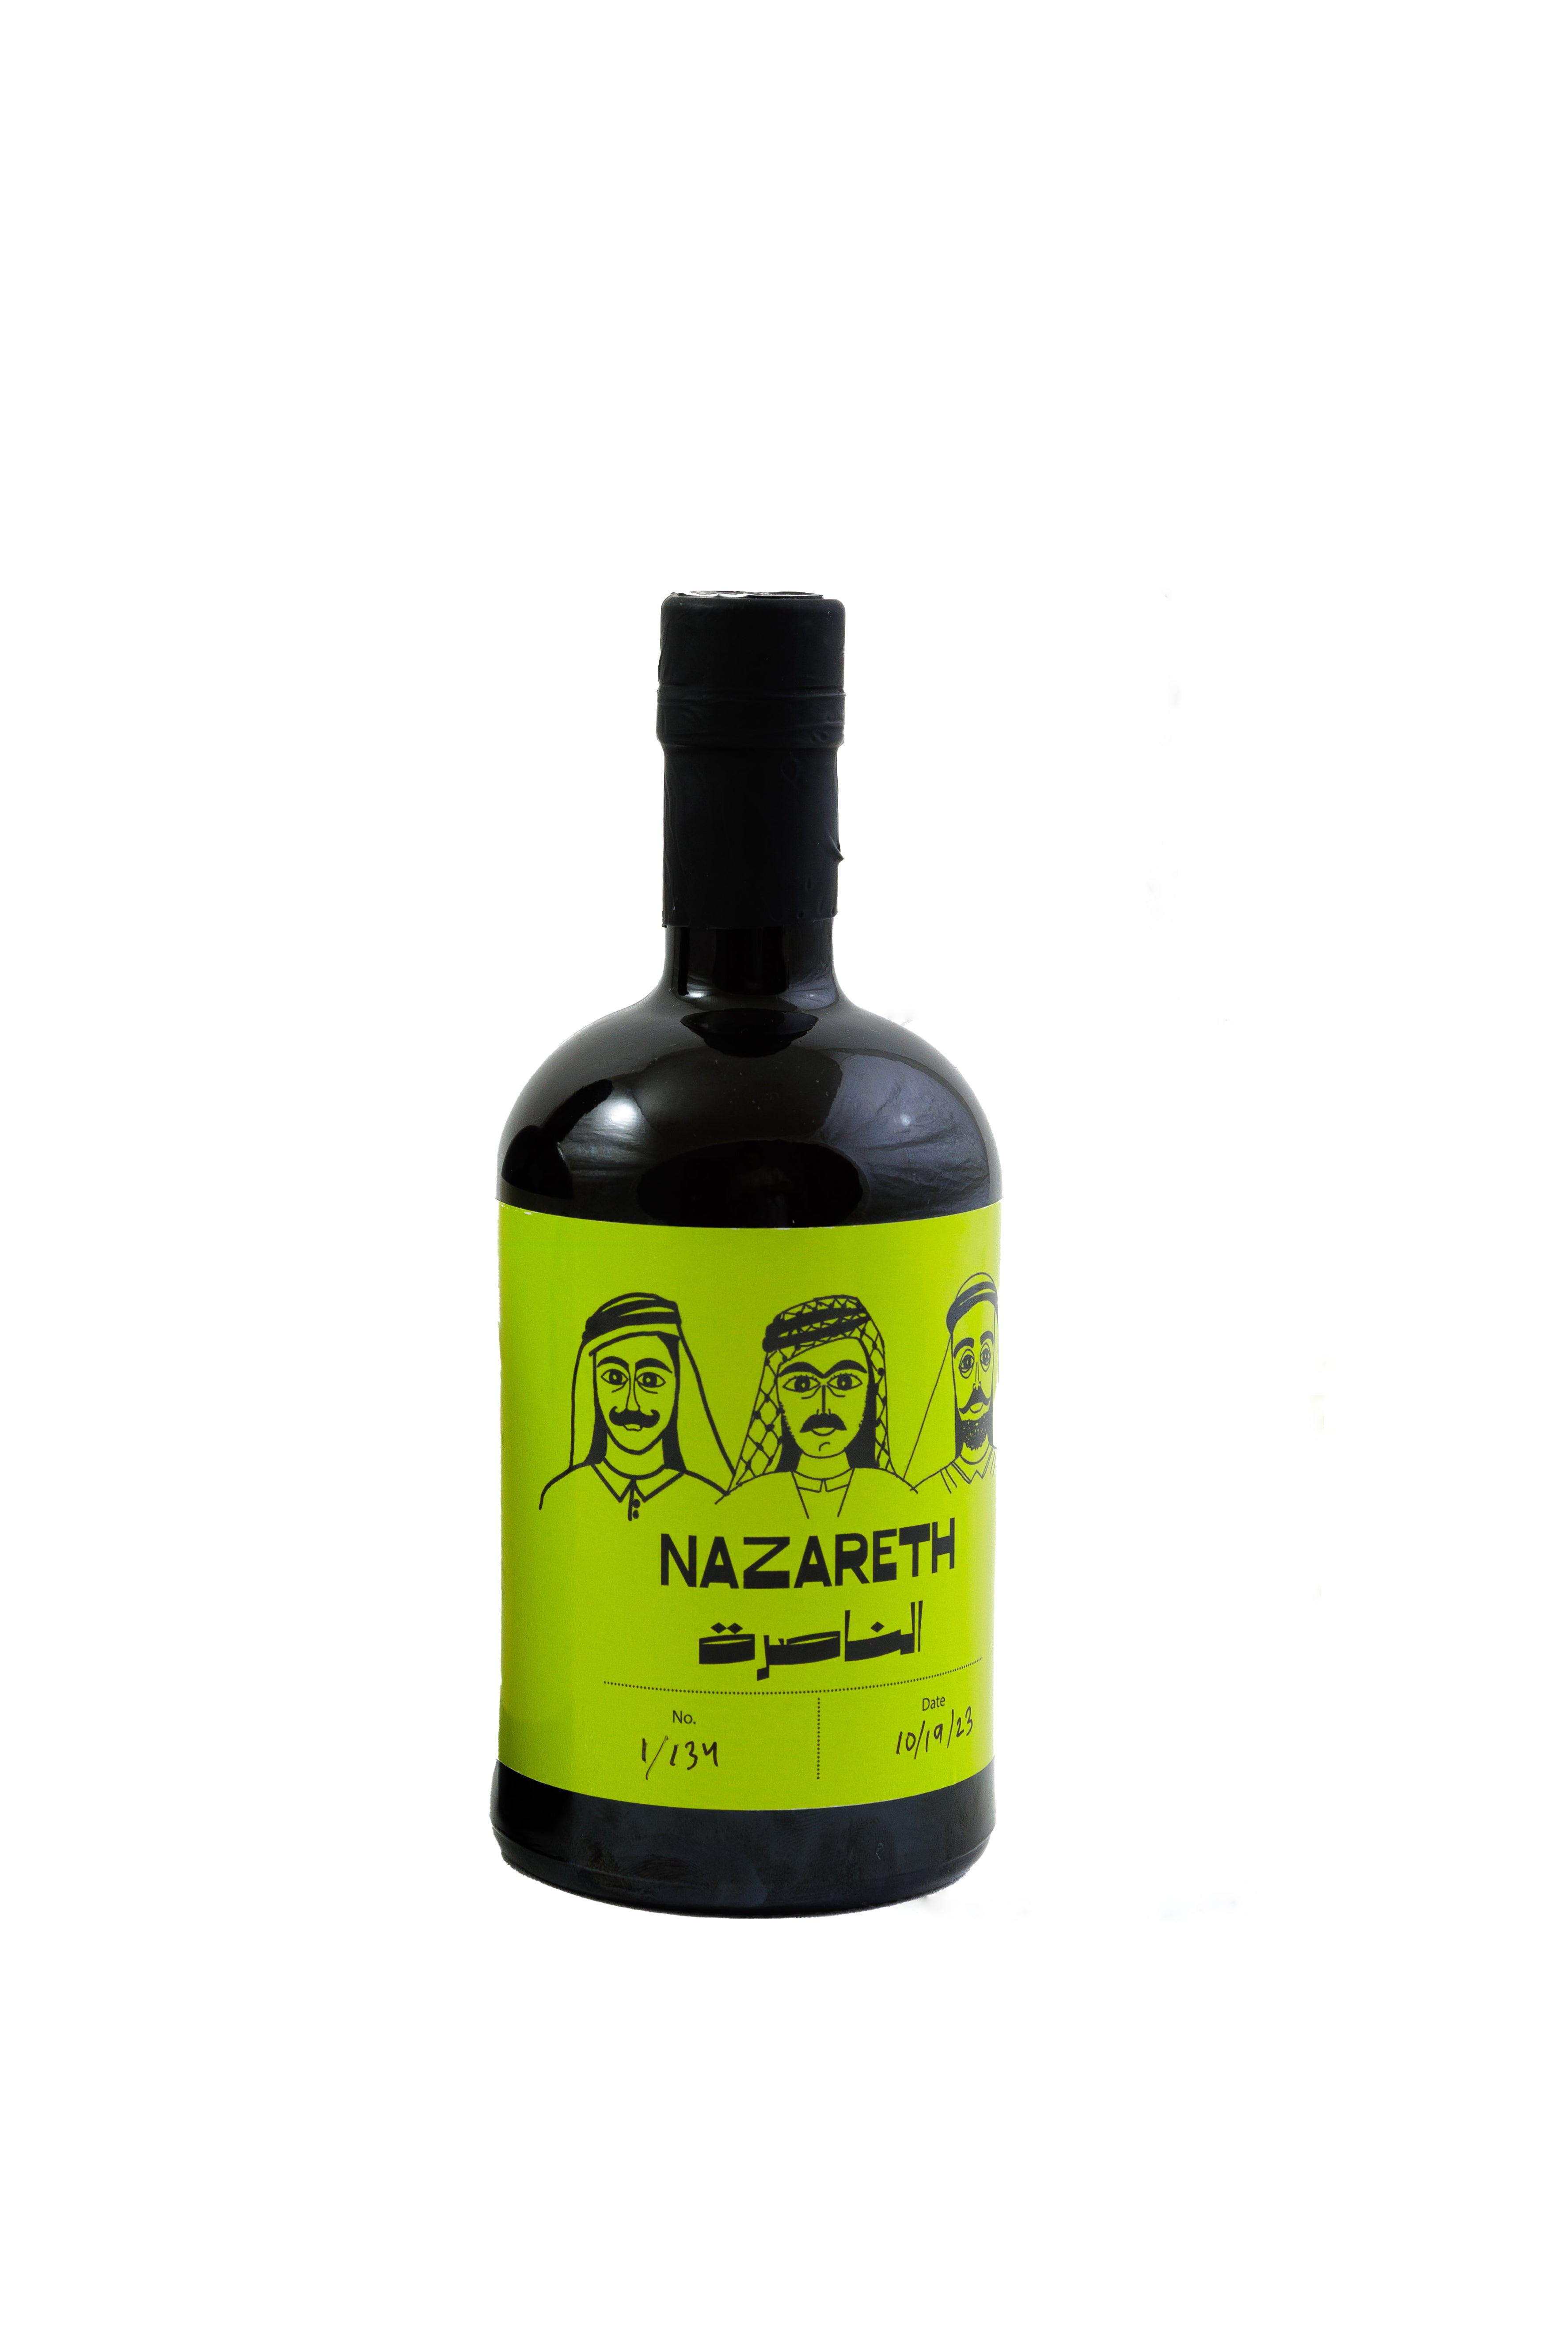 Nazareth's Kalamata Extracted Olive Oil - Unique, Smooth and Rich Taste [Harvest Year: 2023]